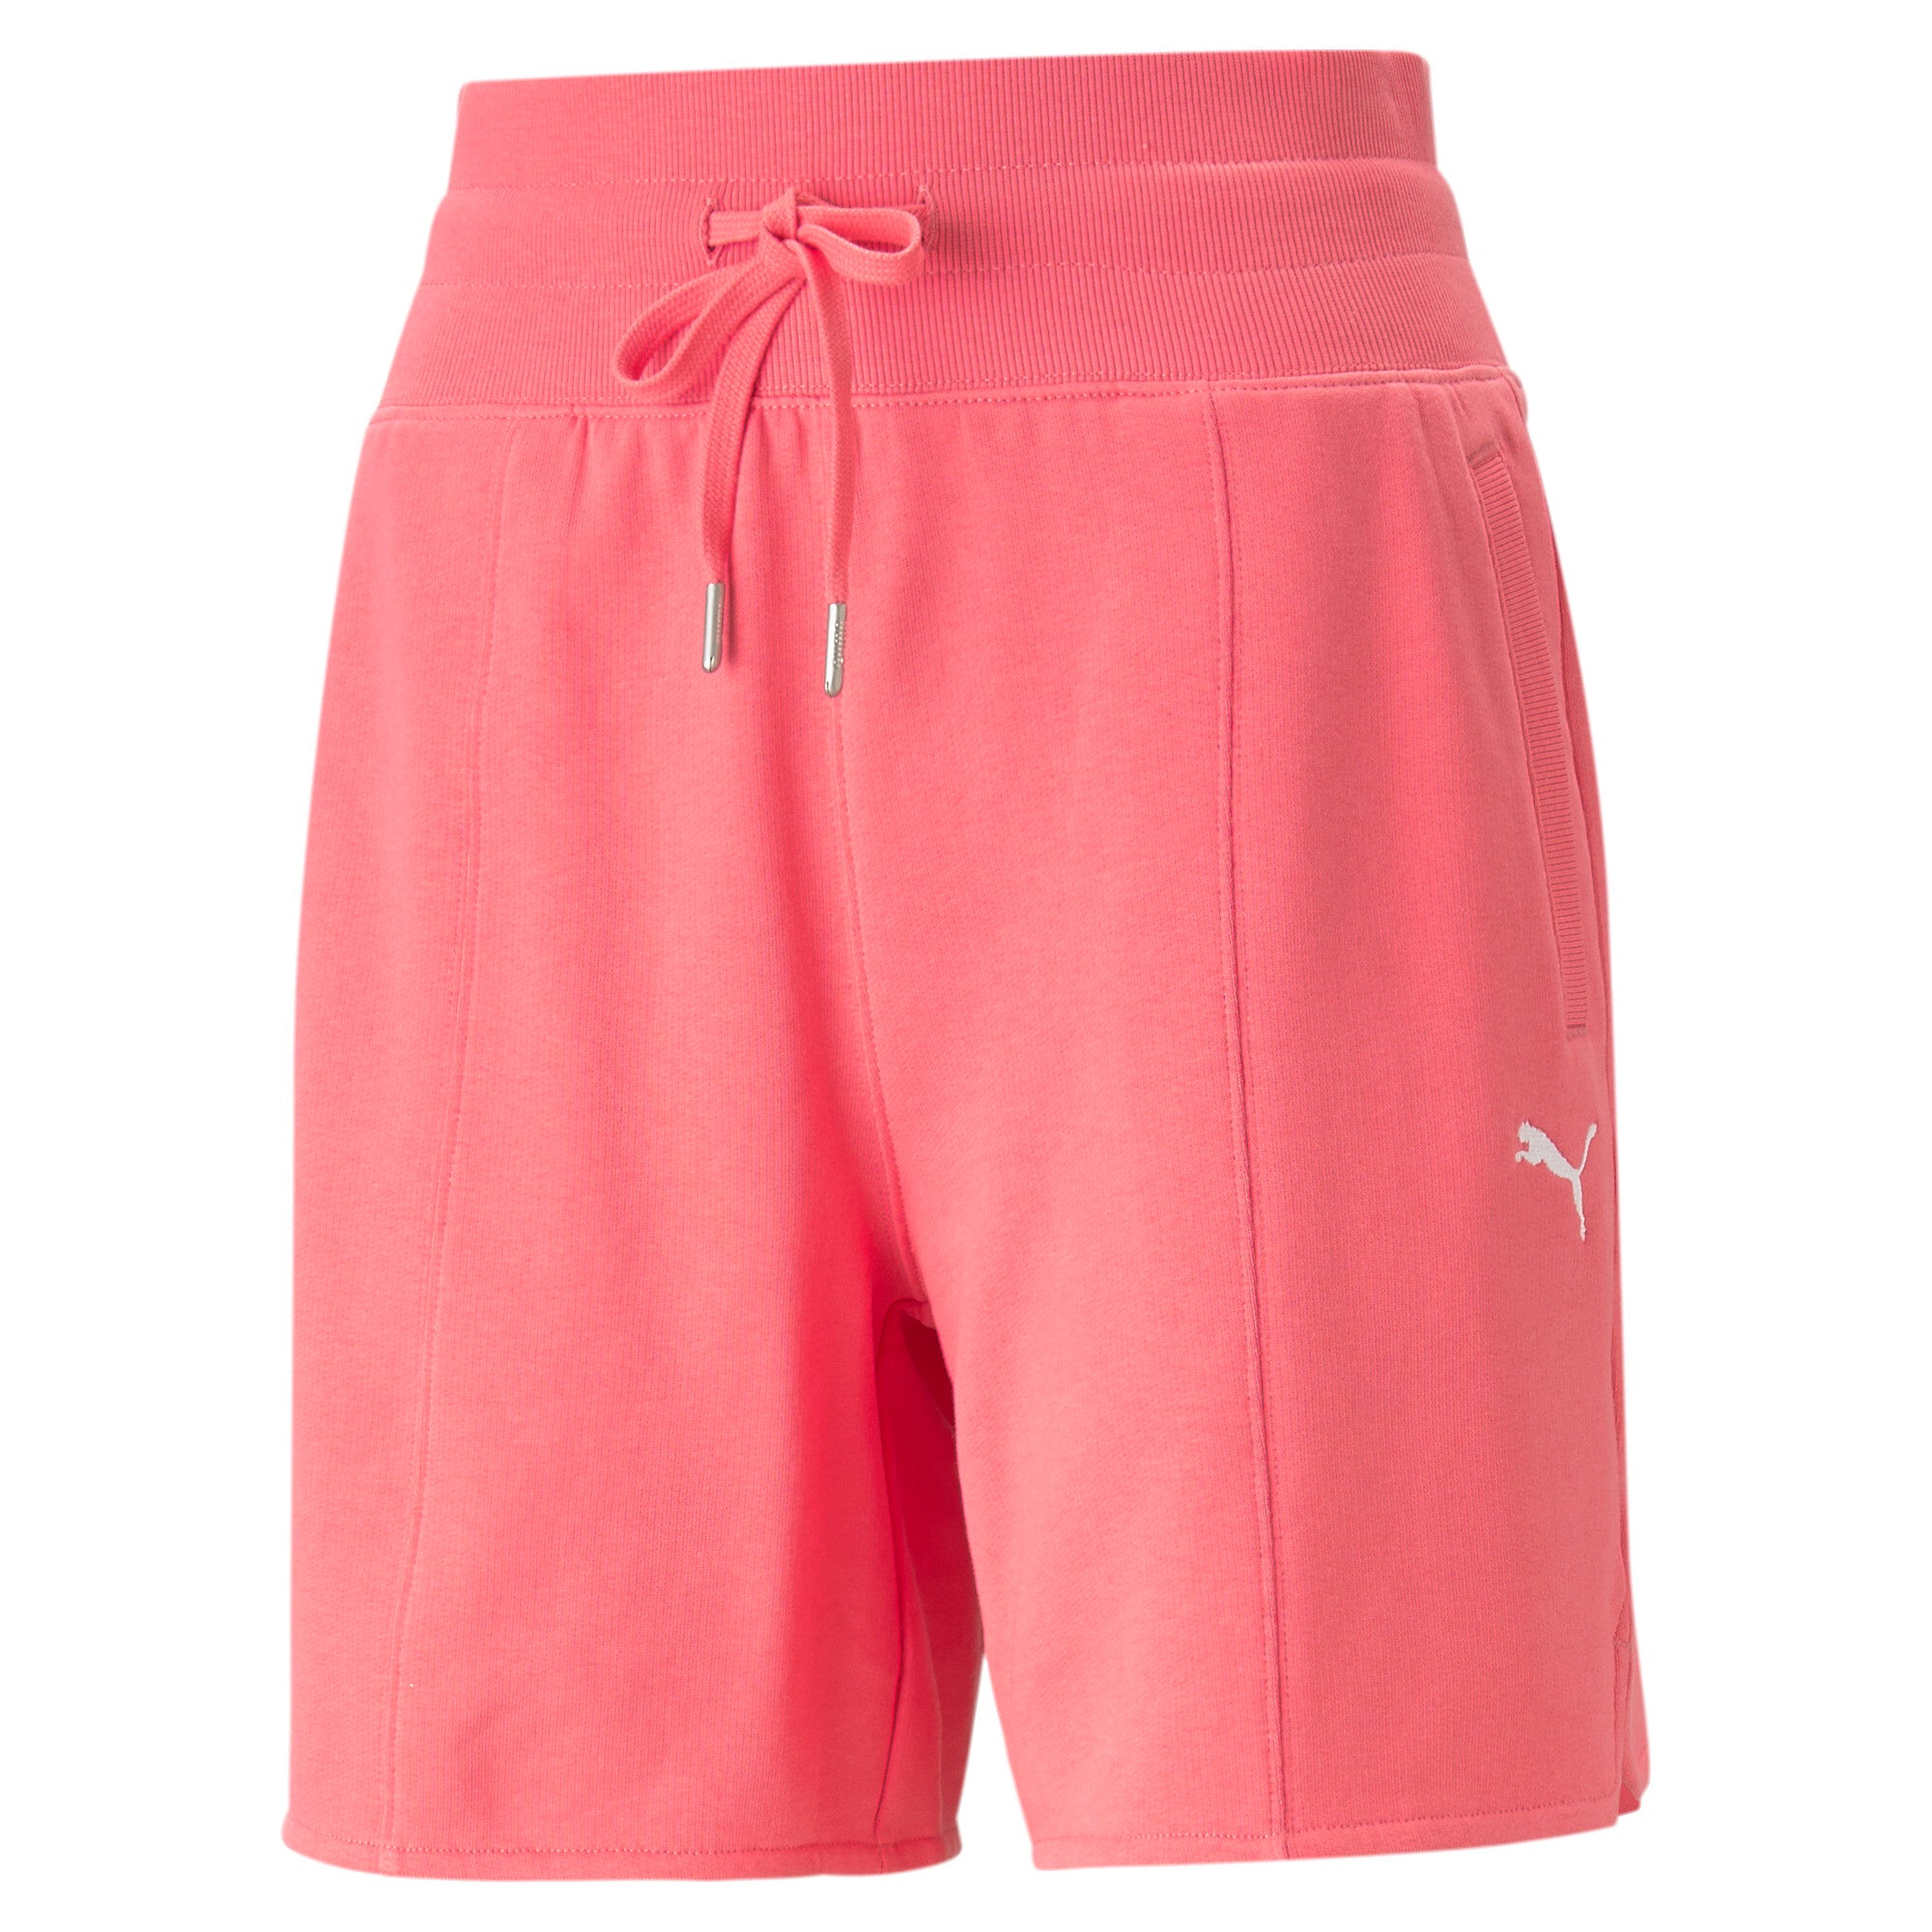 WOMENS HER SHORTS - 67406163